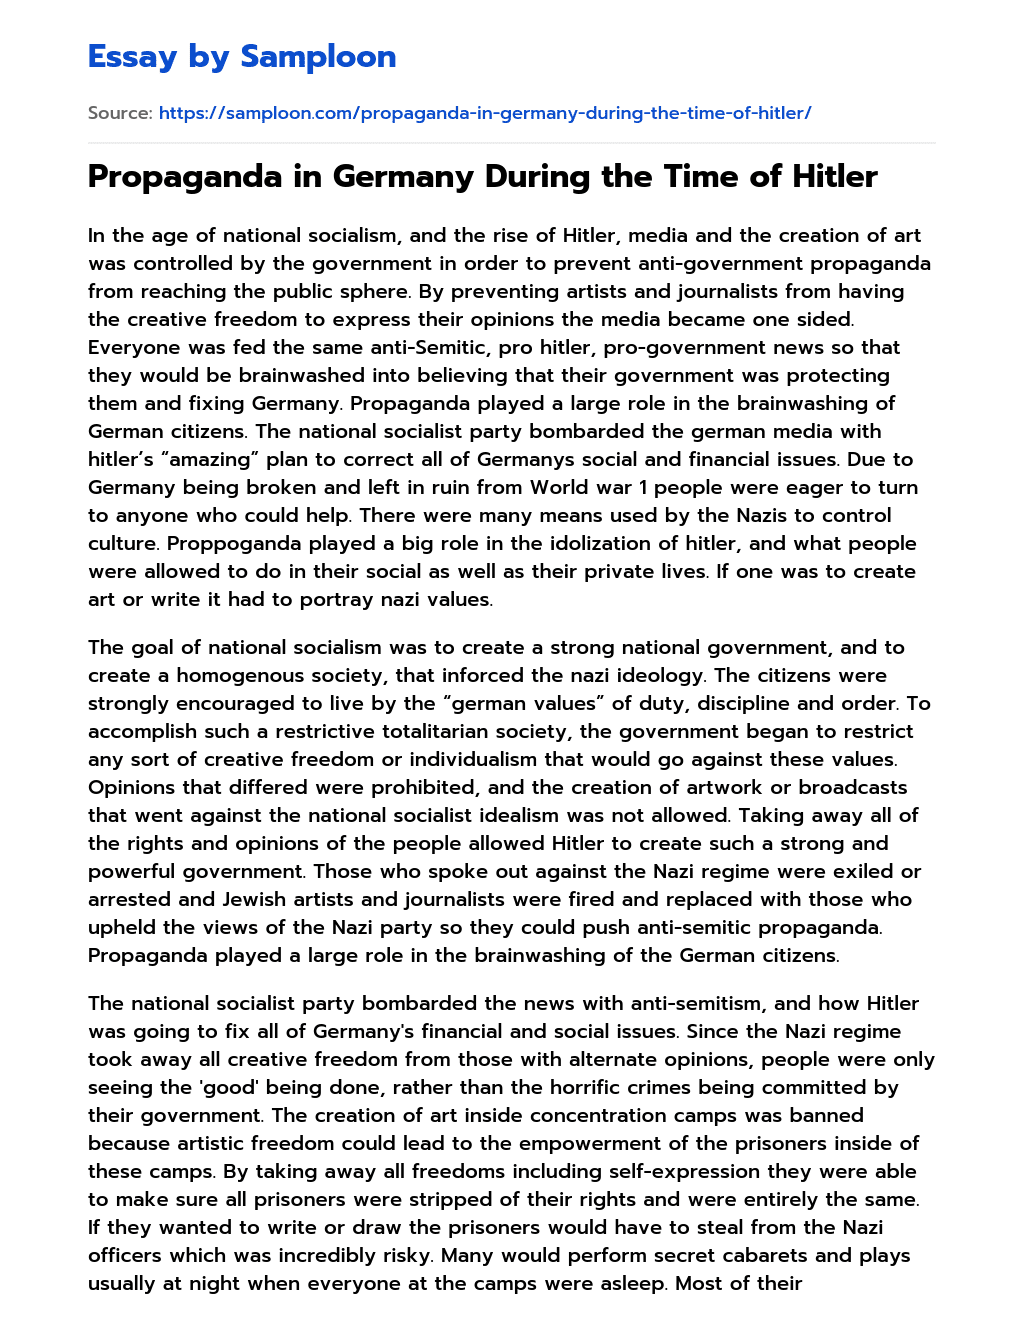 Propaganda in Germany During the Time of Hitler essay